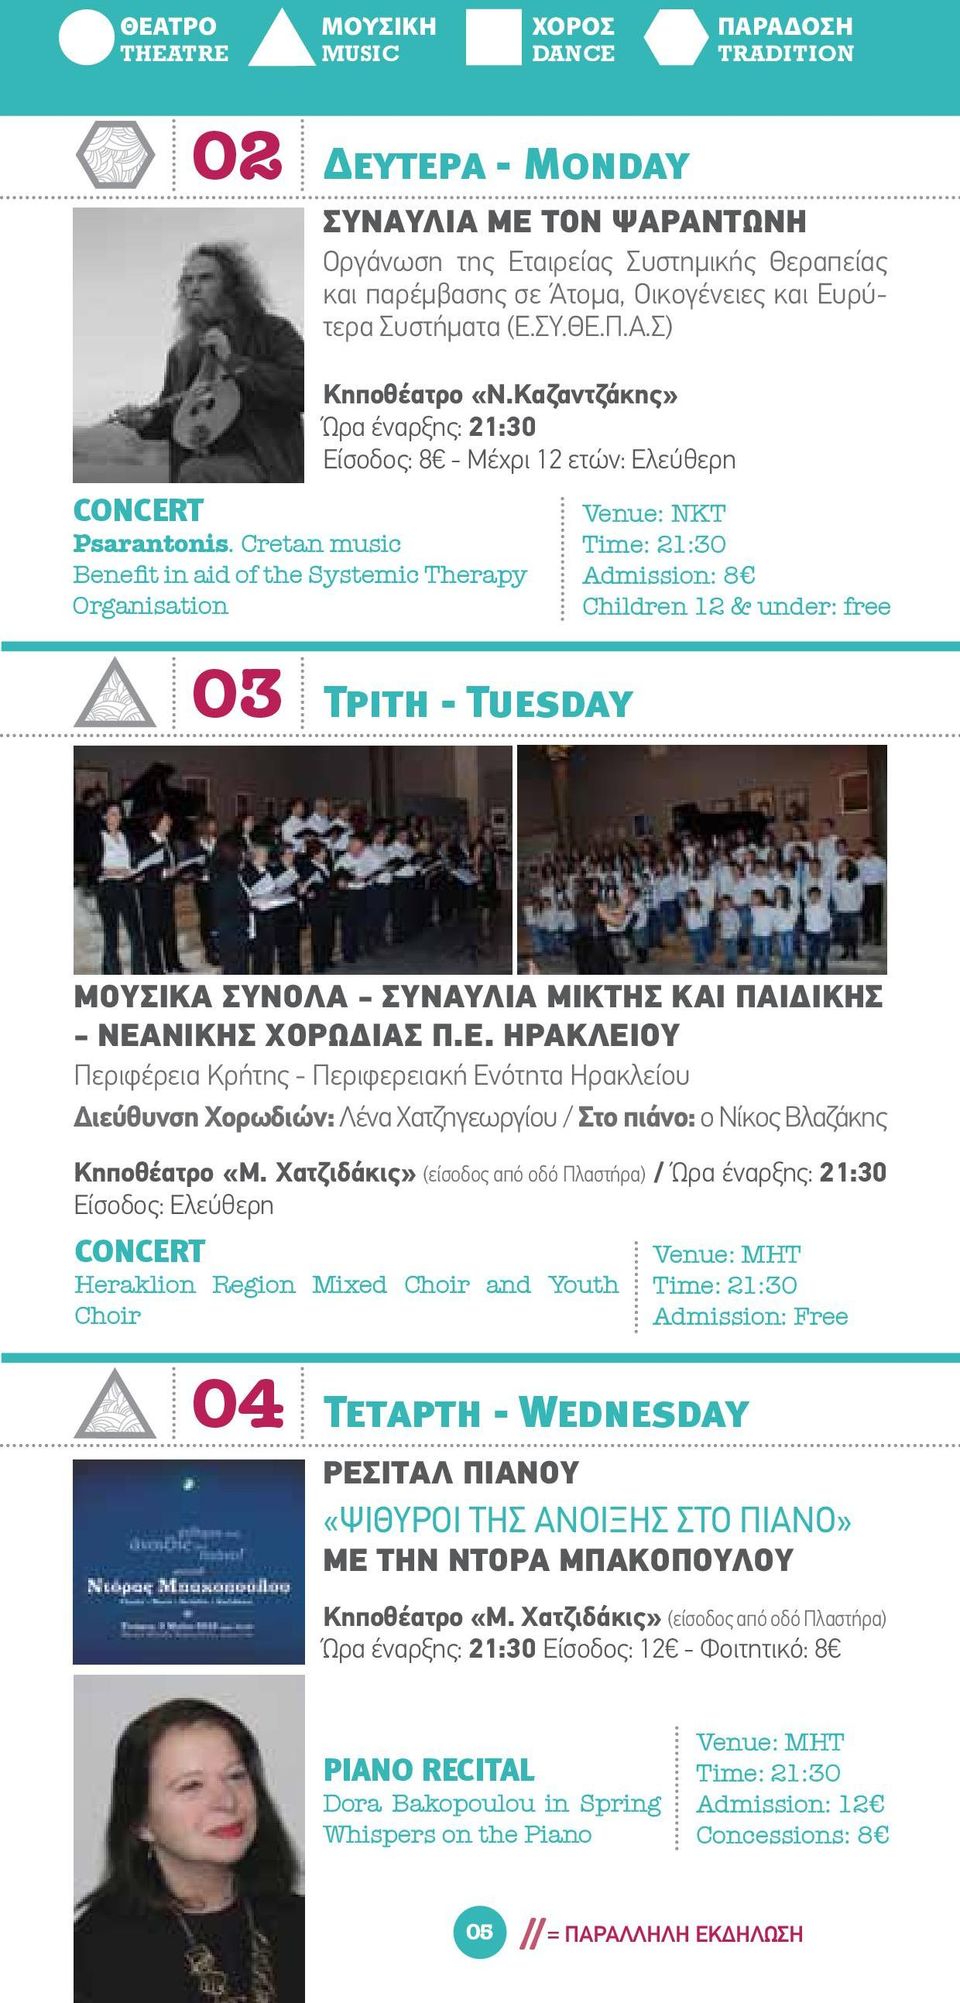 Cretan music Benefit in aid of the Systemic Therapy Organisation Venue: NKT Admission: 8 Children 12 & under: free 03 Τρίτη - Tuesday ΜΟΥΣΙΚΑ ΣΥΝΟΛΑ - ΣΥΝΑΥΛΙΑ ΜΙΚΤΗΣ ΚΑΙ ΠΑΙΔΙΚΗΣ - ΝΕΑΝΙΚΗΣ ΧΟΡΩΔΙΑΣ